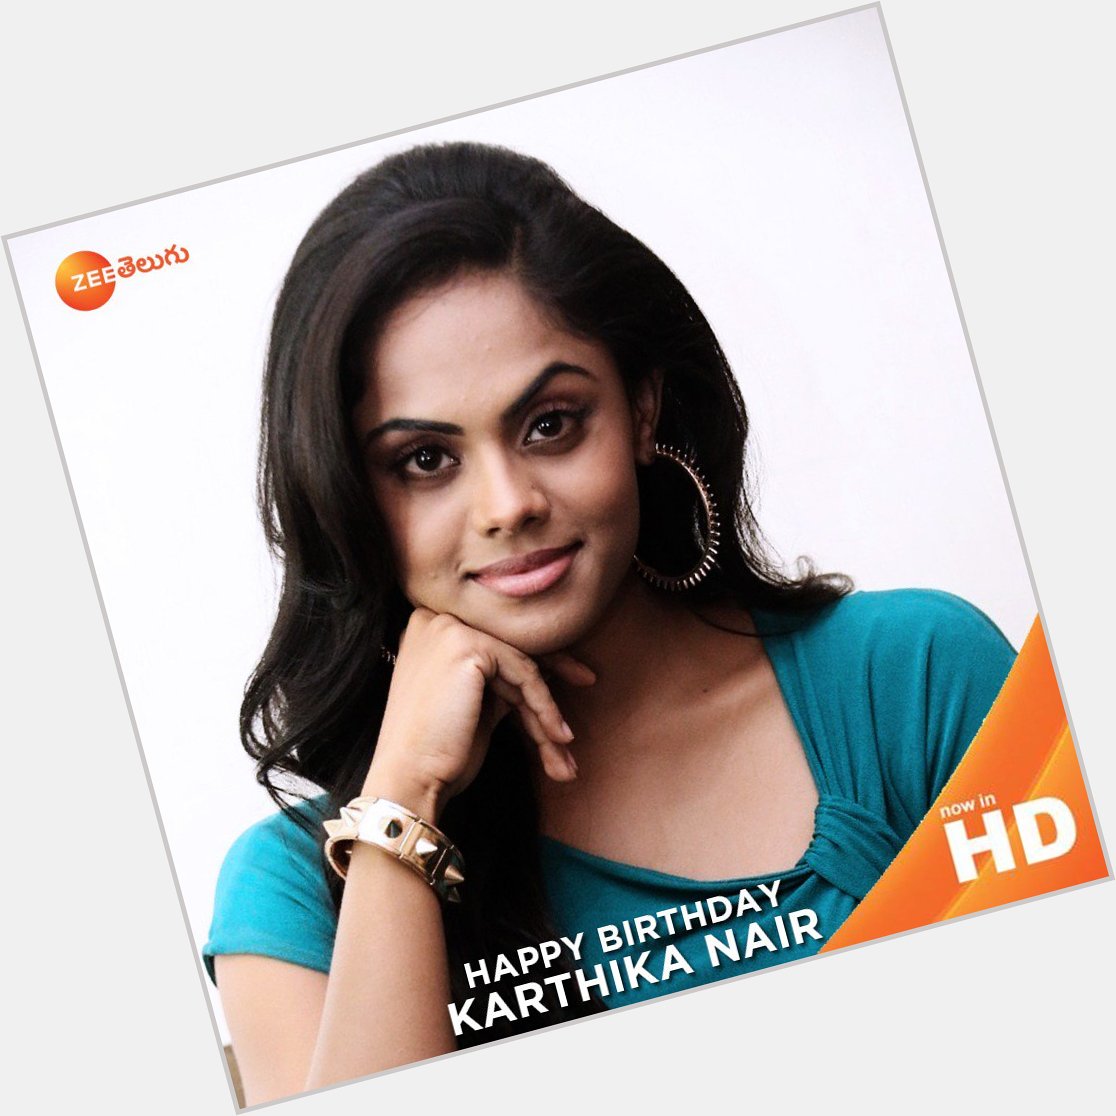 Lets wish Karthika nair, A Very Happy Birthday and great Success ahead. 